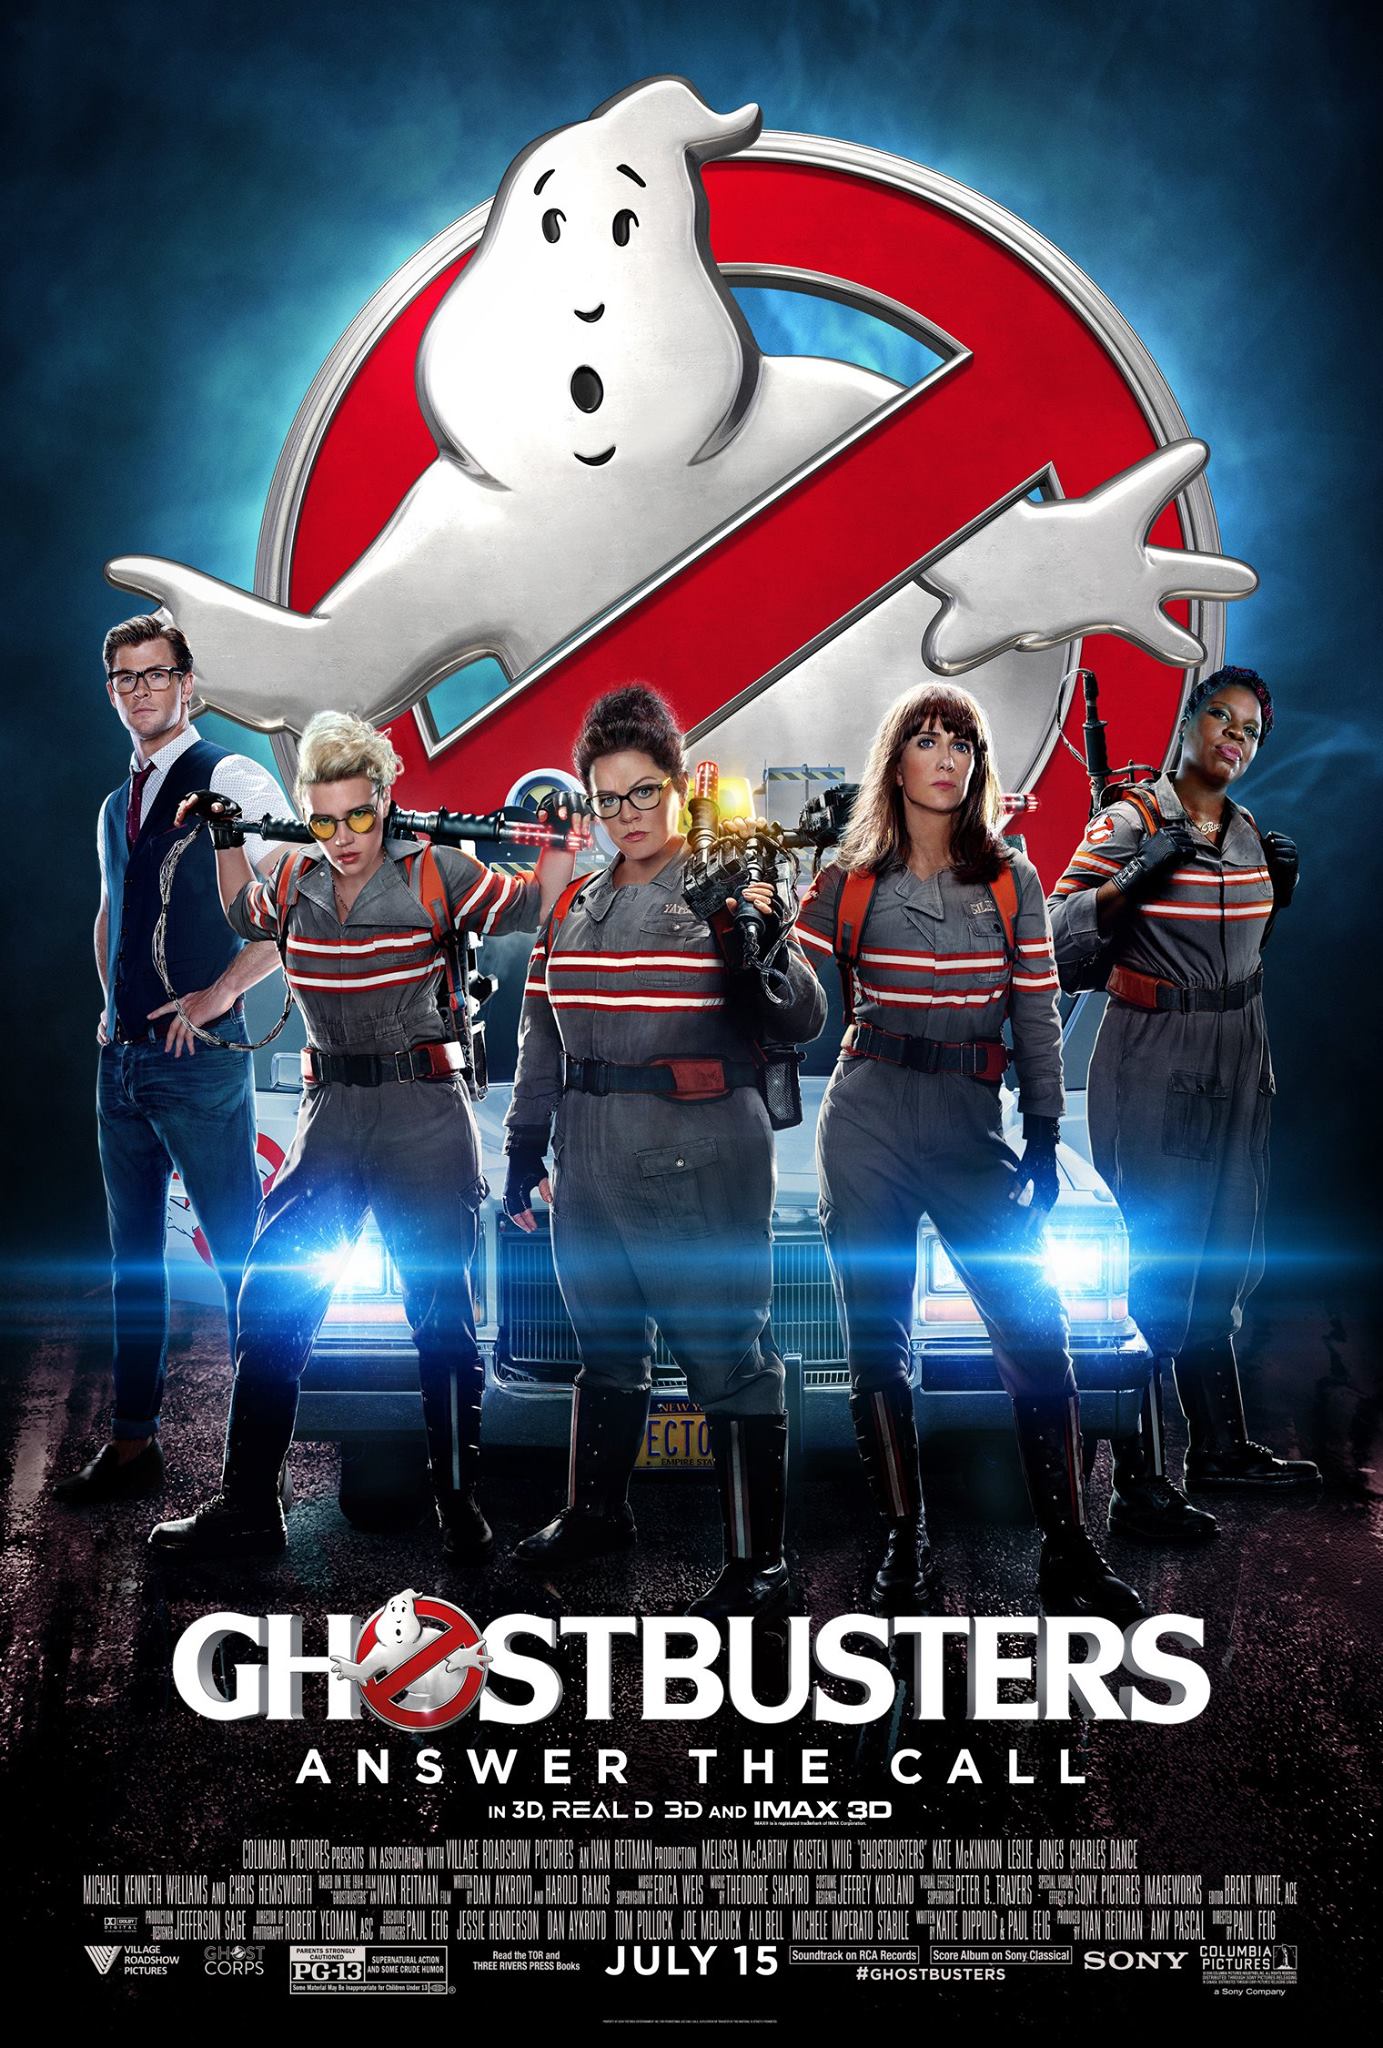 new ghostbusterse posters